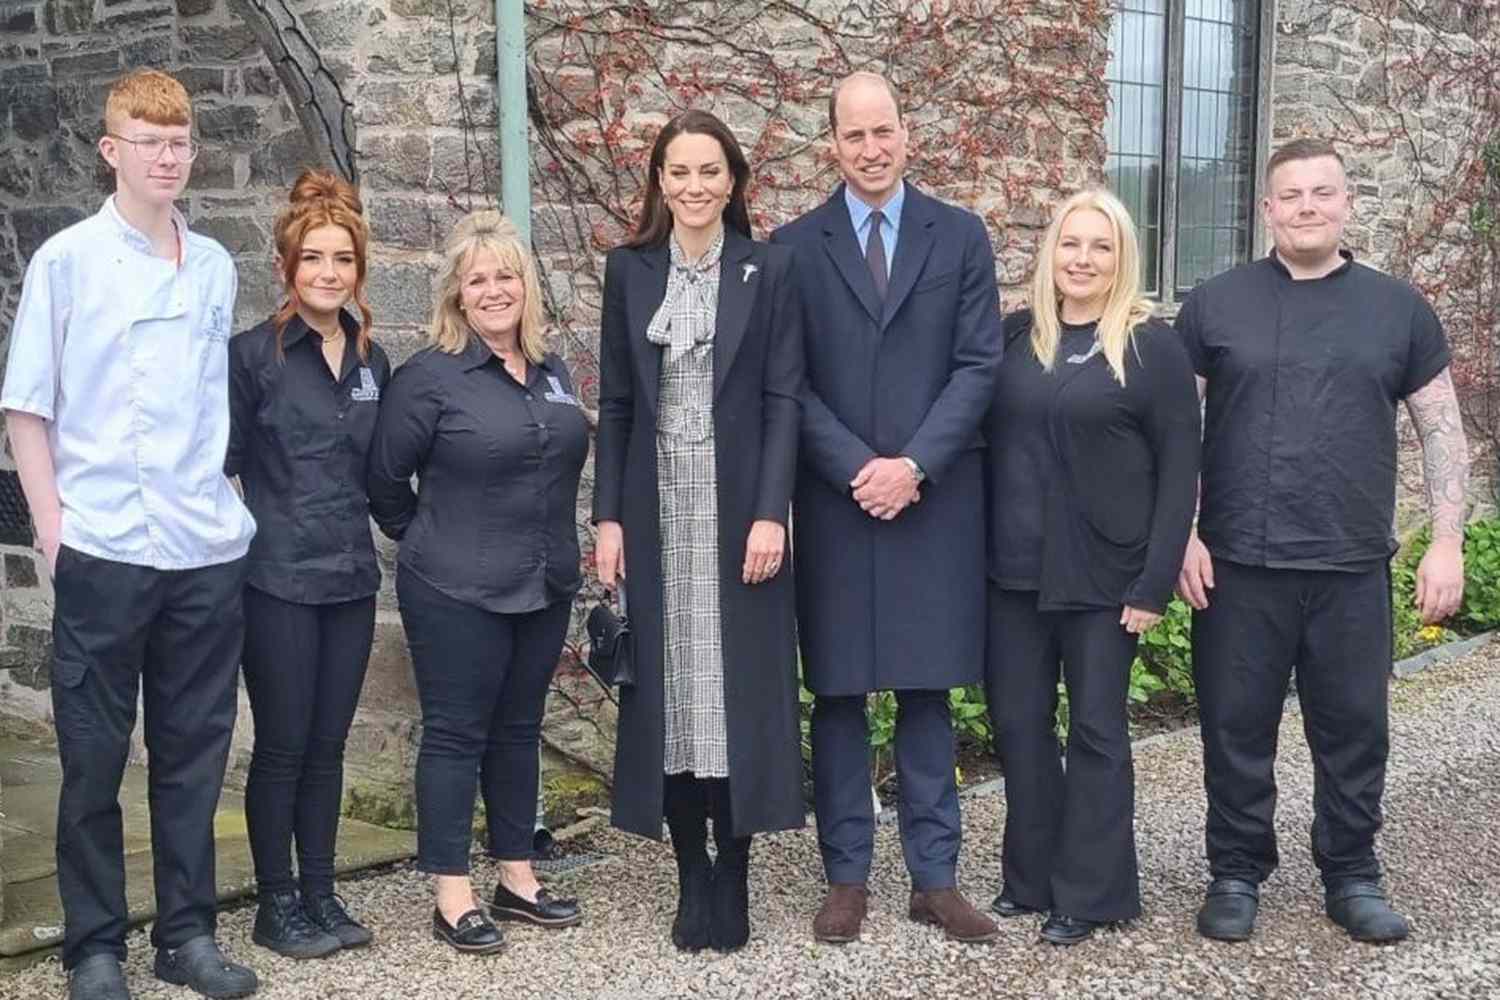 Kate Middleton and Prince William Seen in New Photo After Surprise B&B Stay Last Year